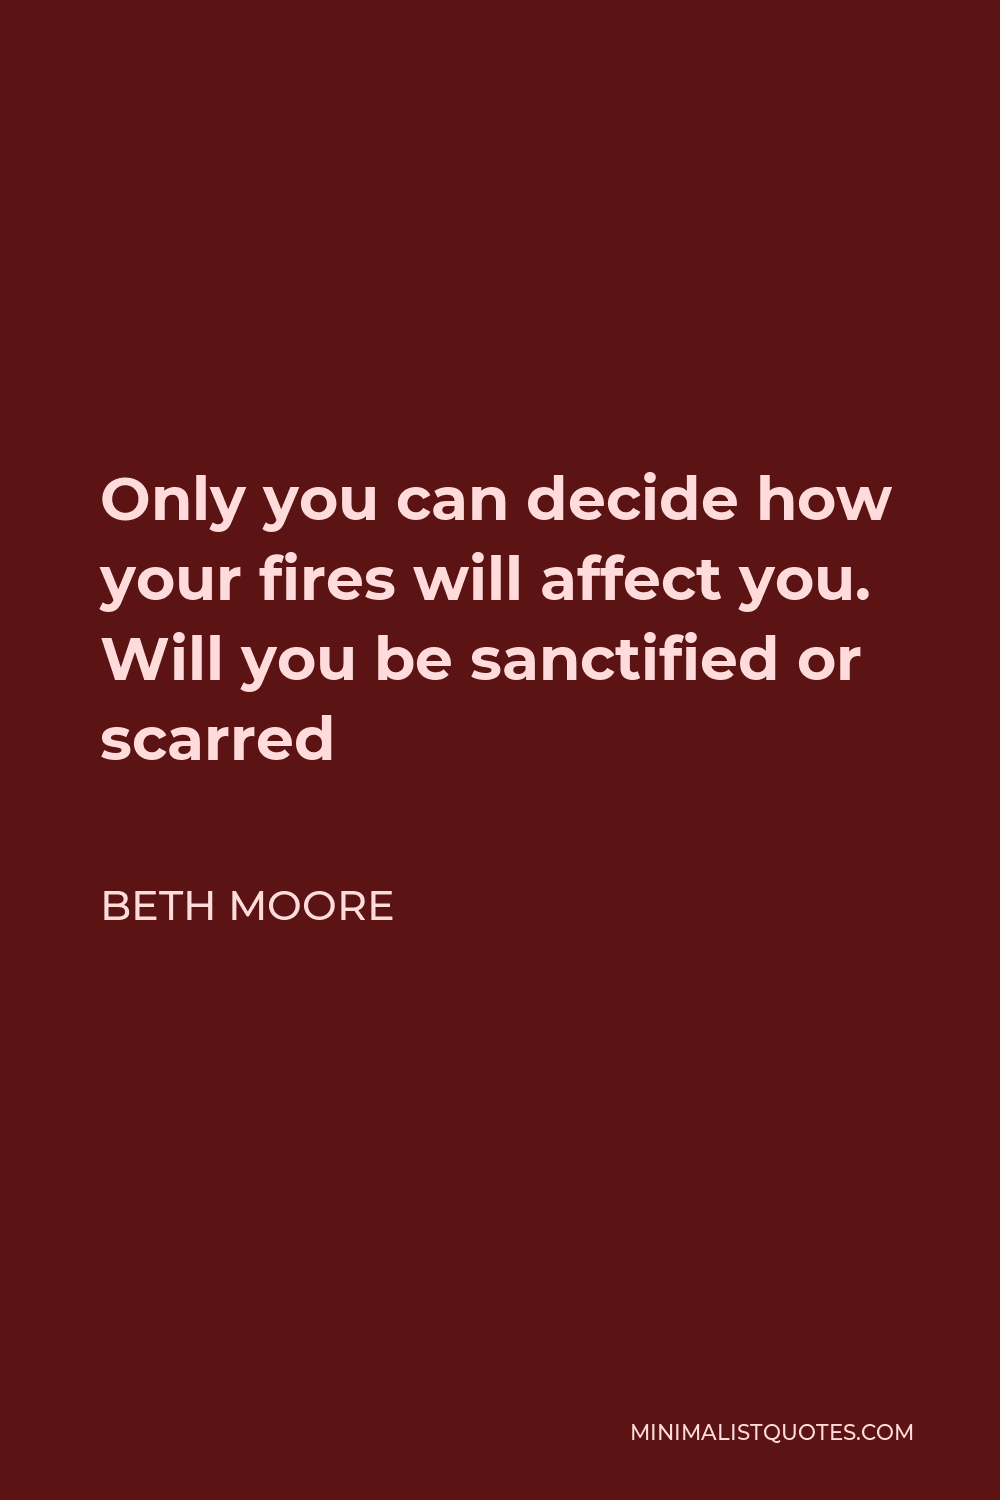 Beth Moore Quote - Only you can decide how your fires will affect you. Will you be sanctified or scarred